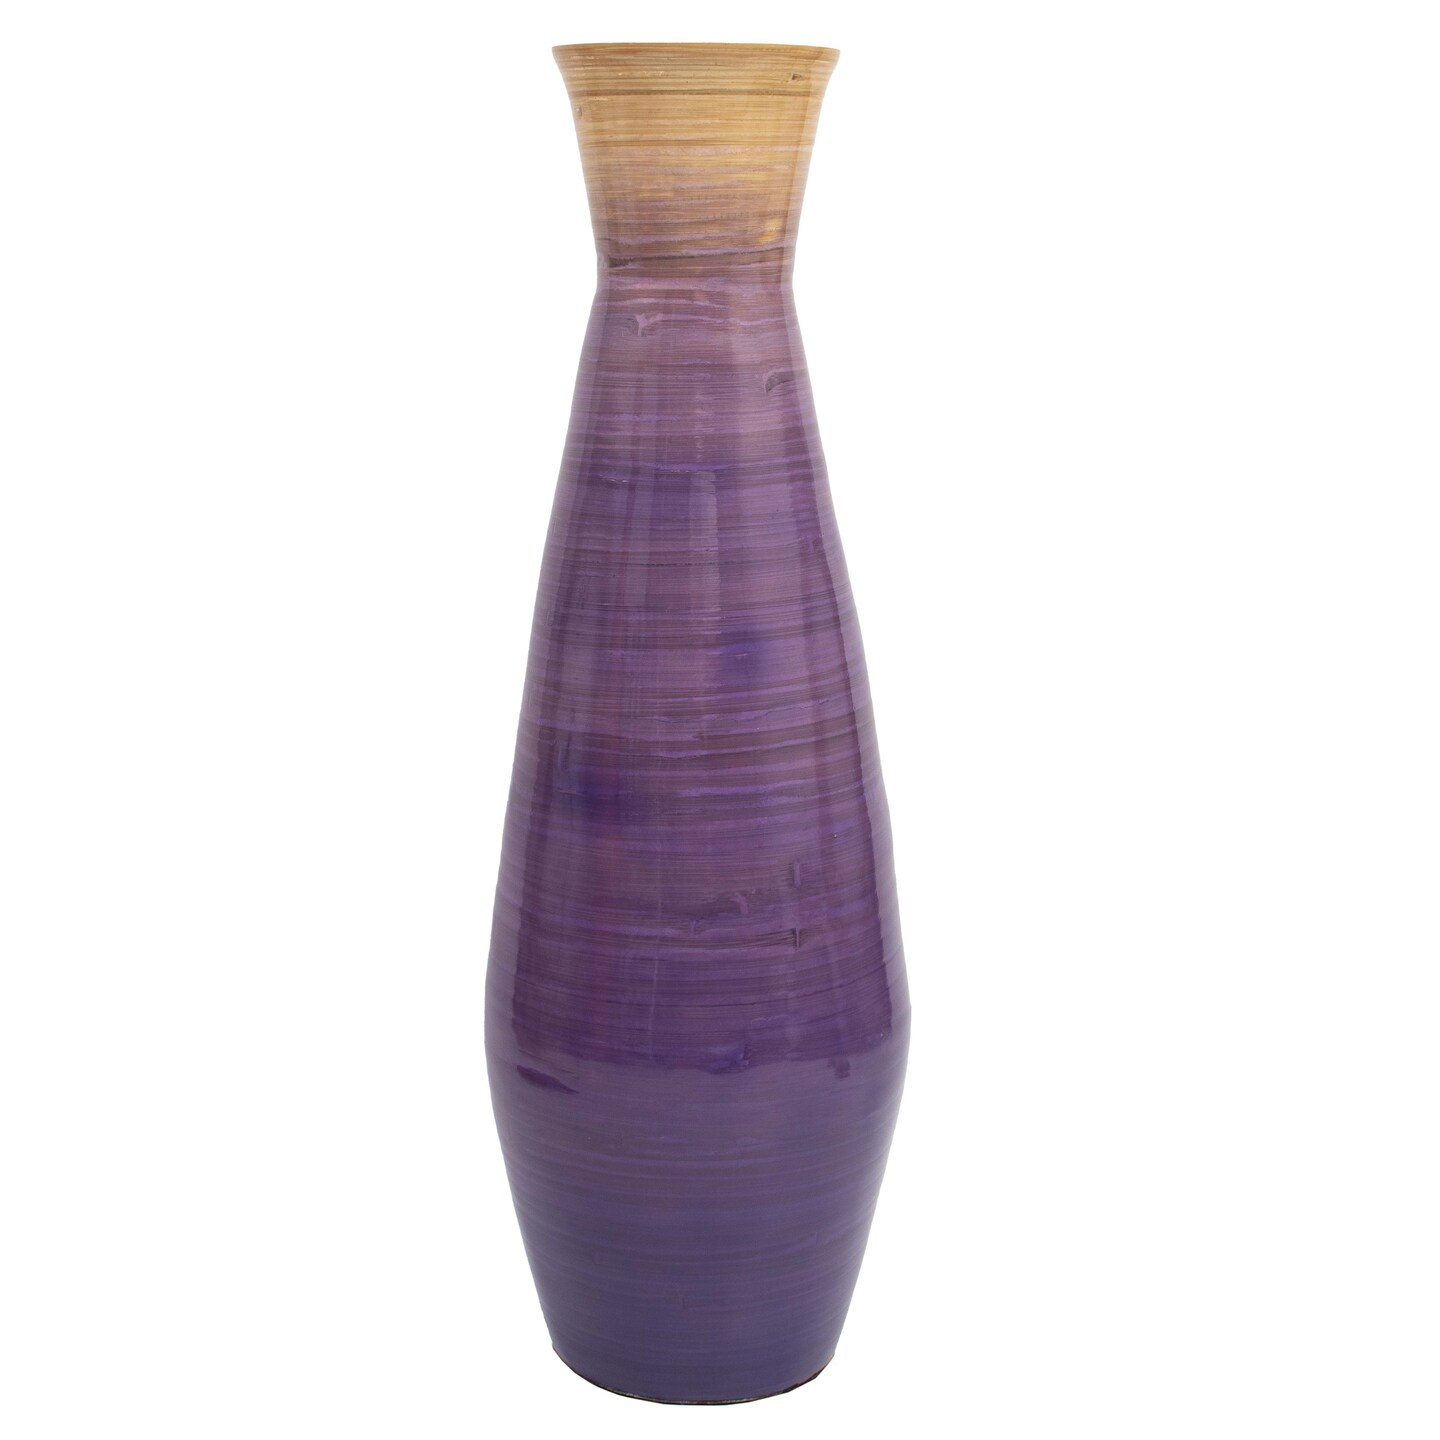 Uniquewise Classic Bamboo Floor Vase Handmade, For Dining, Living Room, Entryway, Fill Up With Dried Branches Or Flowers